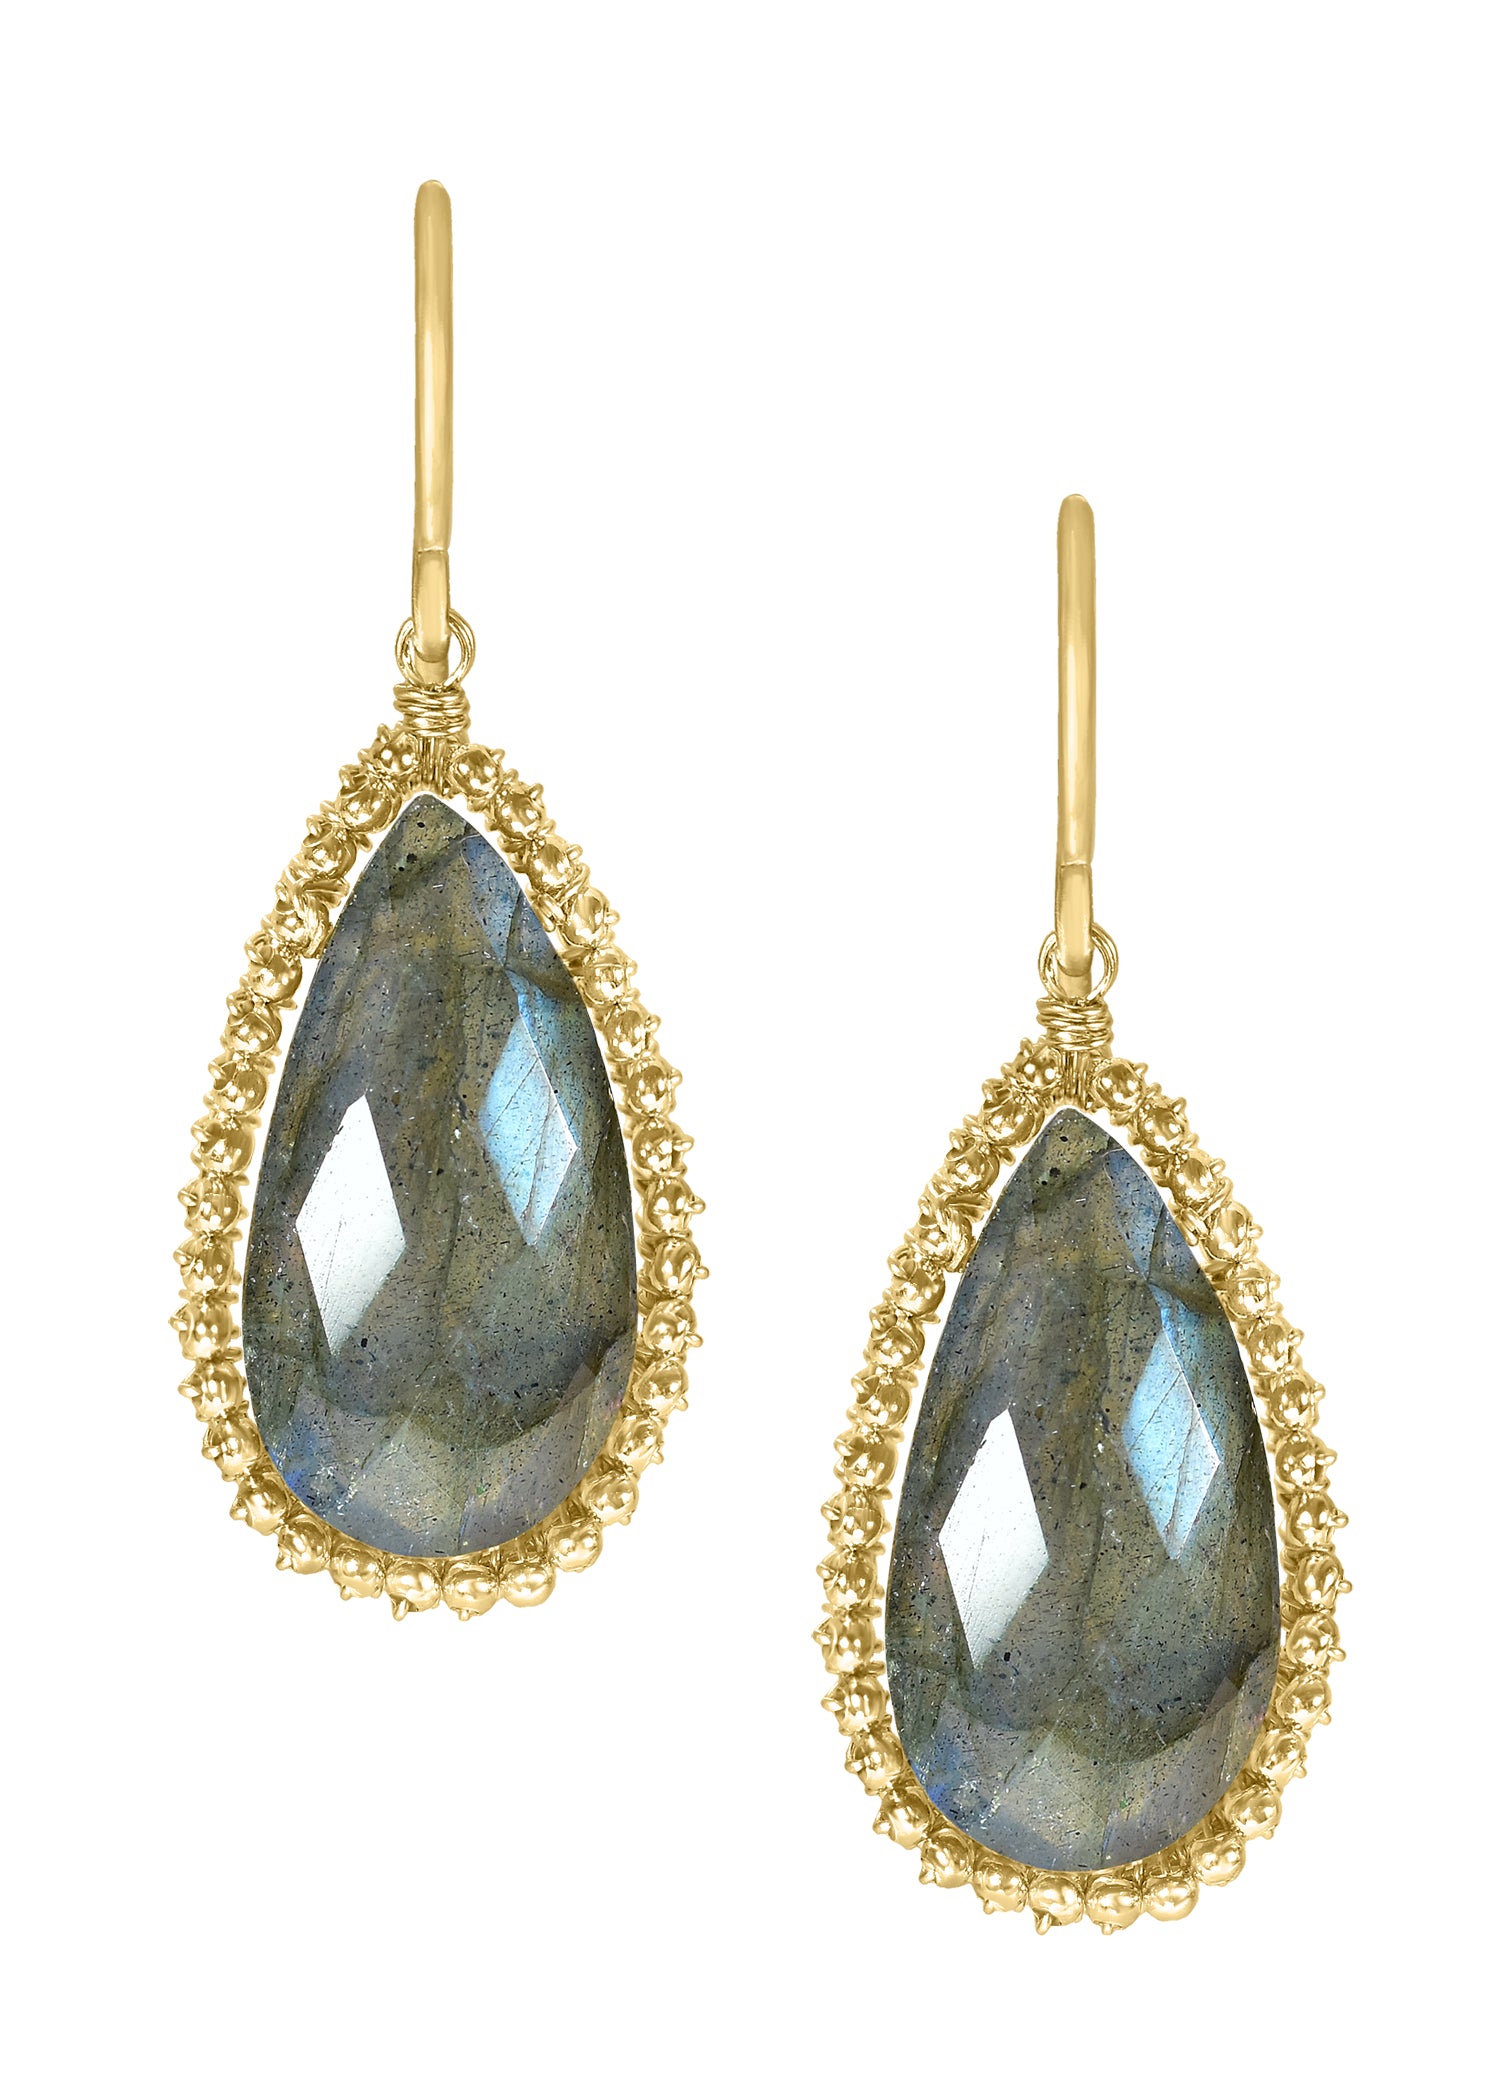 Labradorite 14k gold fill Earrings measure 1-5/16" in length (including the ear wires) and 1/2" in width at the widest point Handmade in our Los Angeles studio